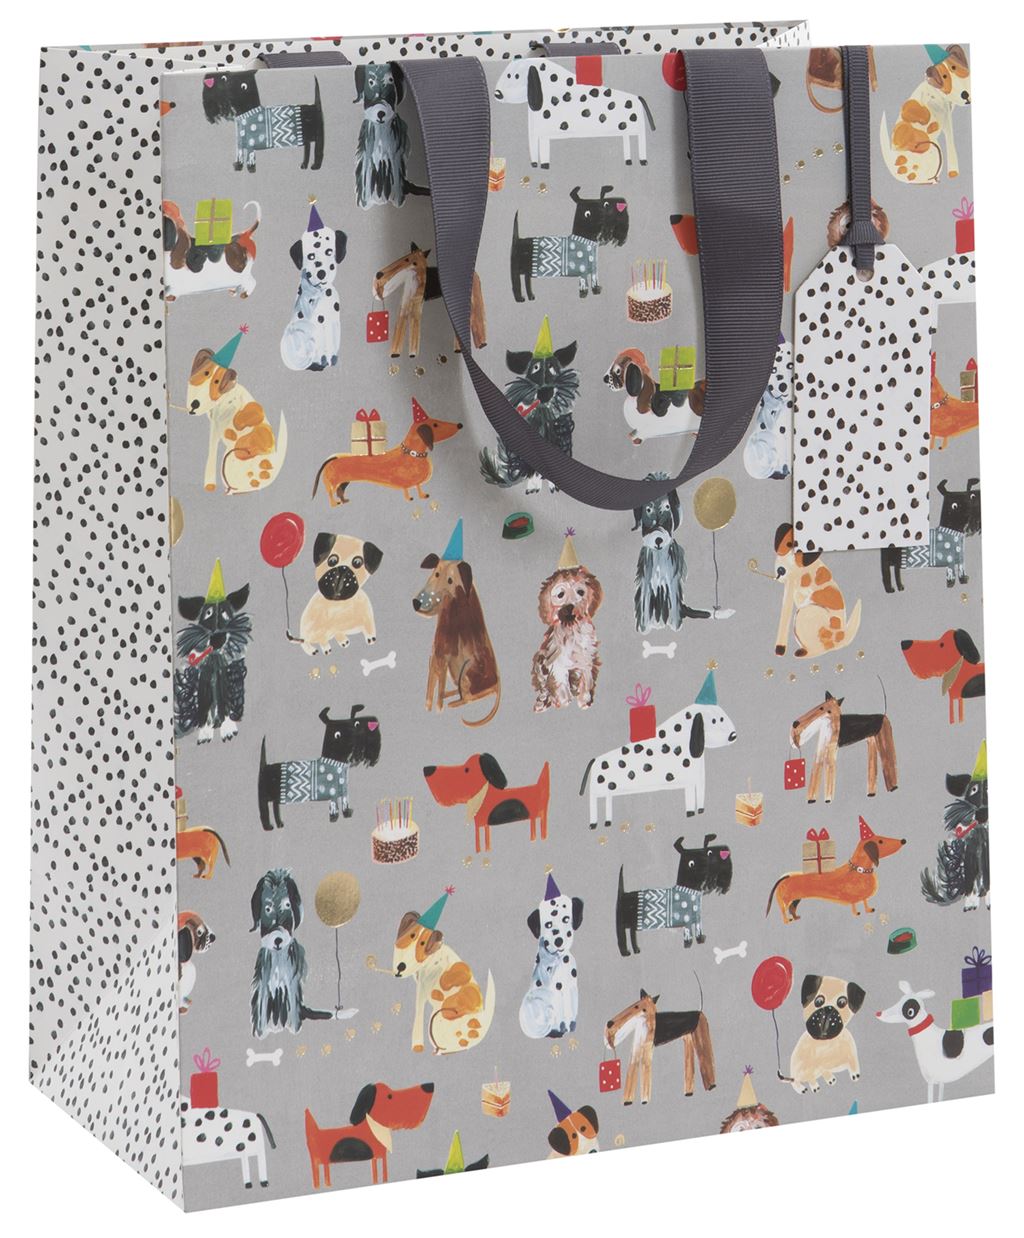 A gift bag with a medium grey background covered in illustrated different breeds of dog - some with party hats, balloons or gifts. The sides and gift tag on the bag have a white background and are covered in small black spots like a Dalmatian. There in a dark grey ribbon handle.